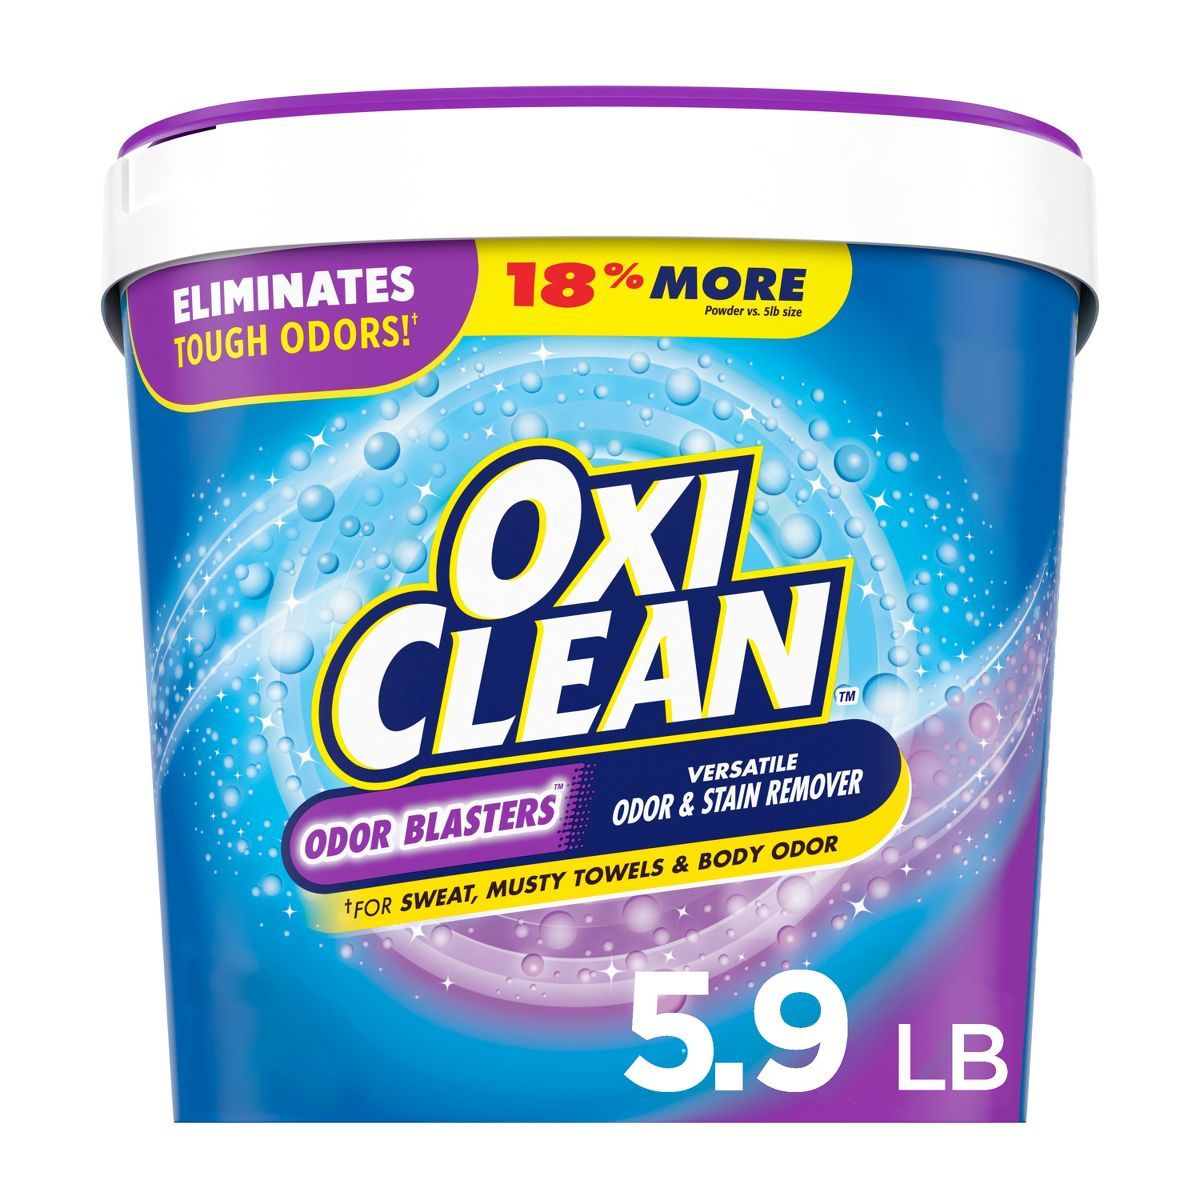 OxiClean Stain Remover Powder - 94oz | Target